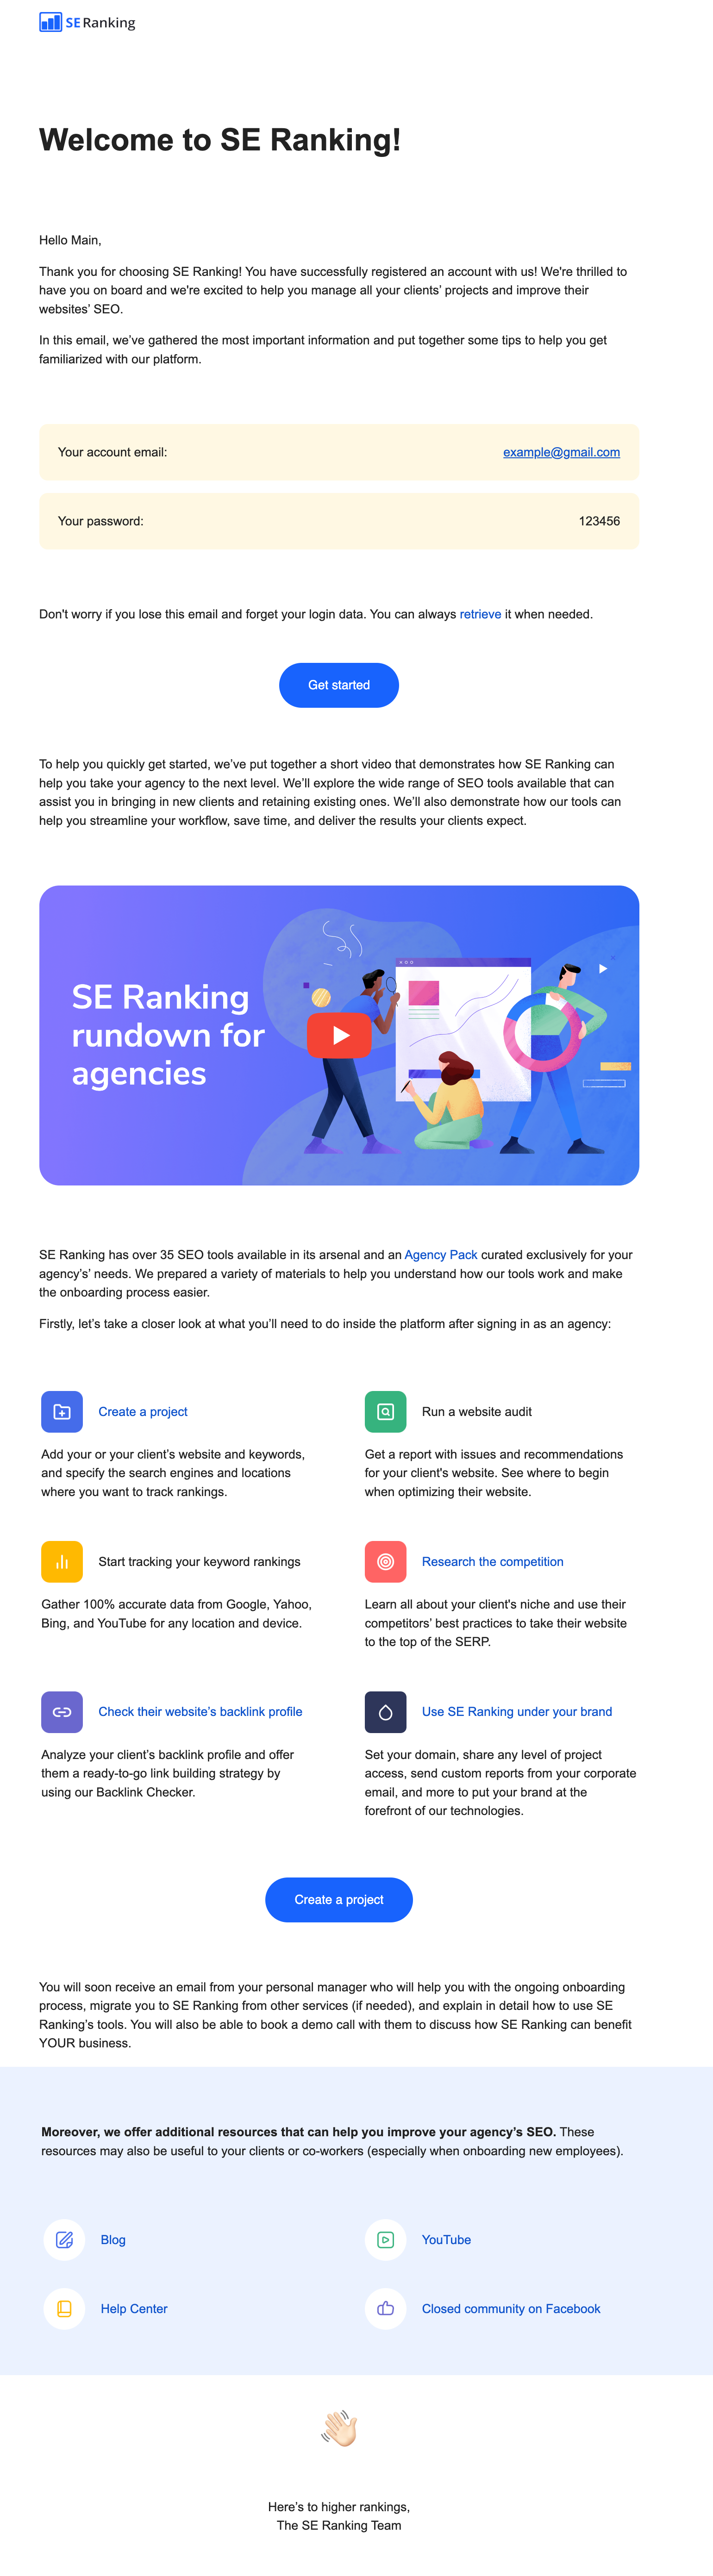 SE Ranking onboarding email